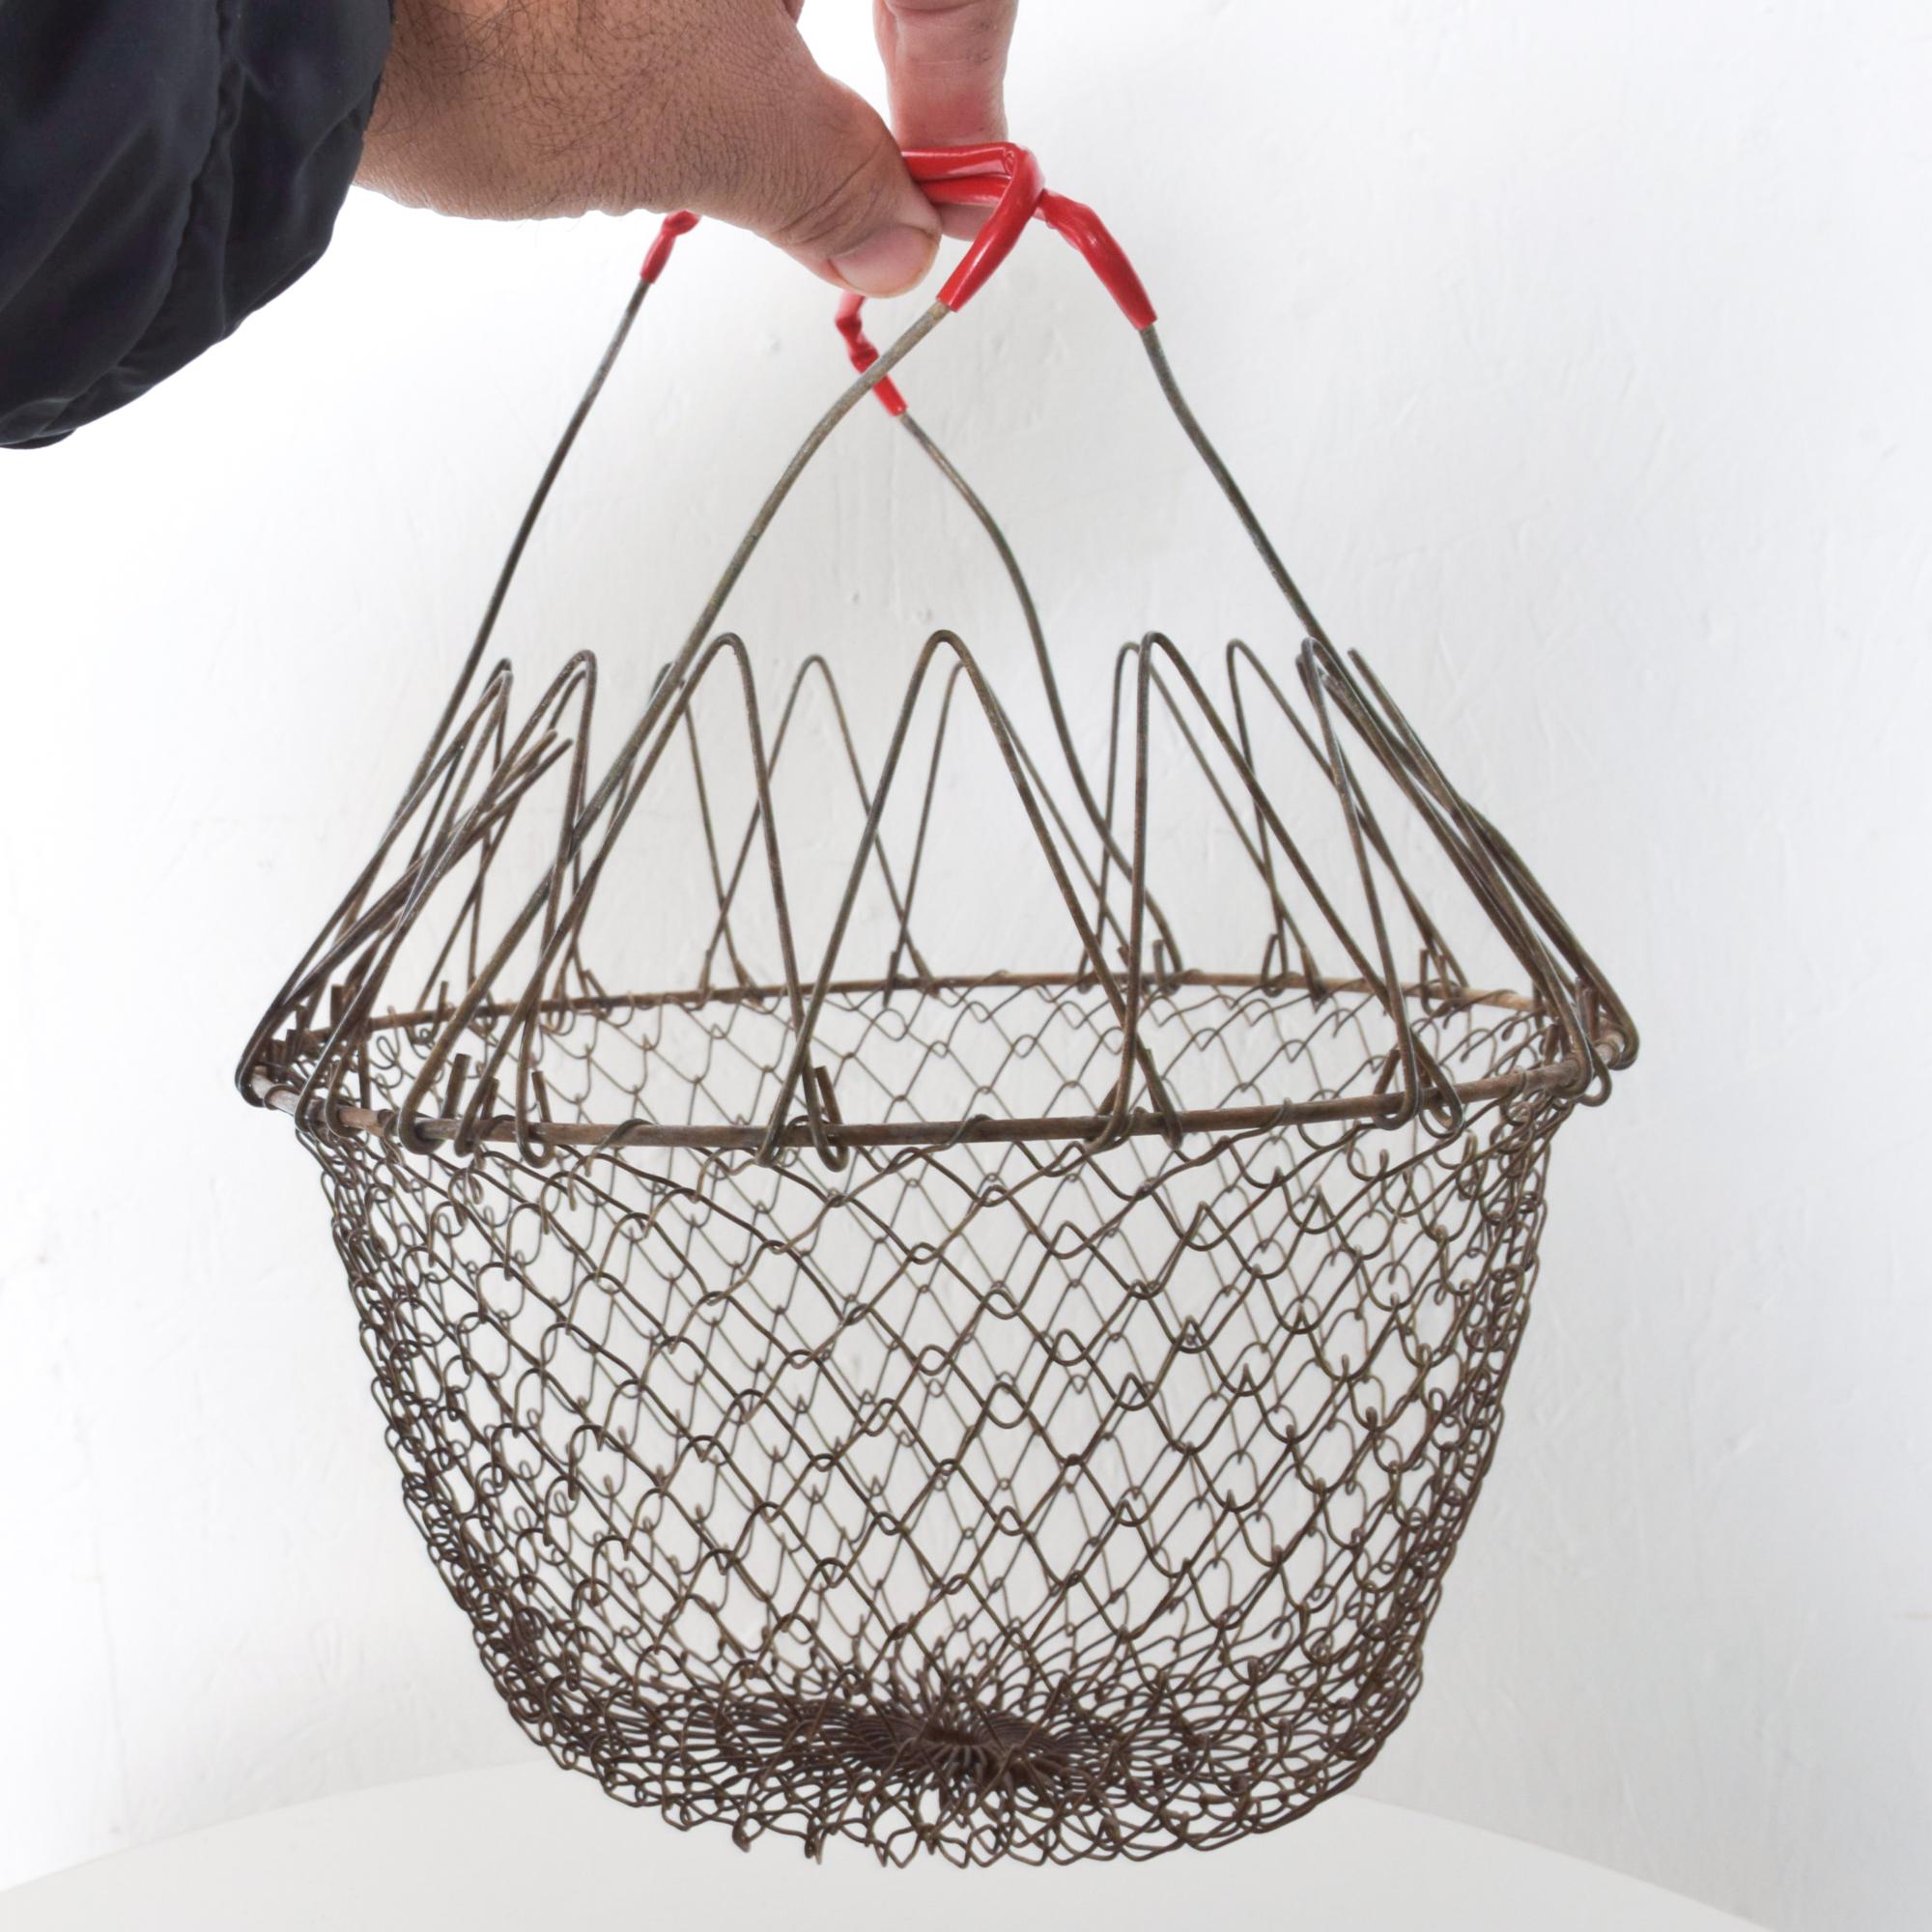 Country Rustic Farmhouse Chic Red Wire Basket Intricate Mesh Grid